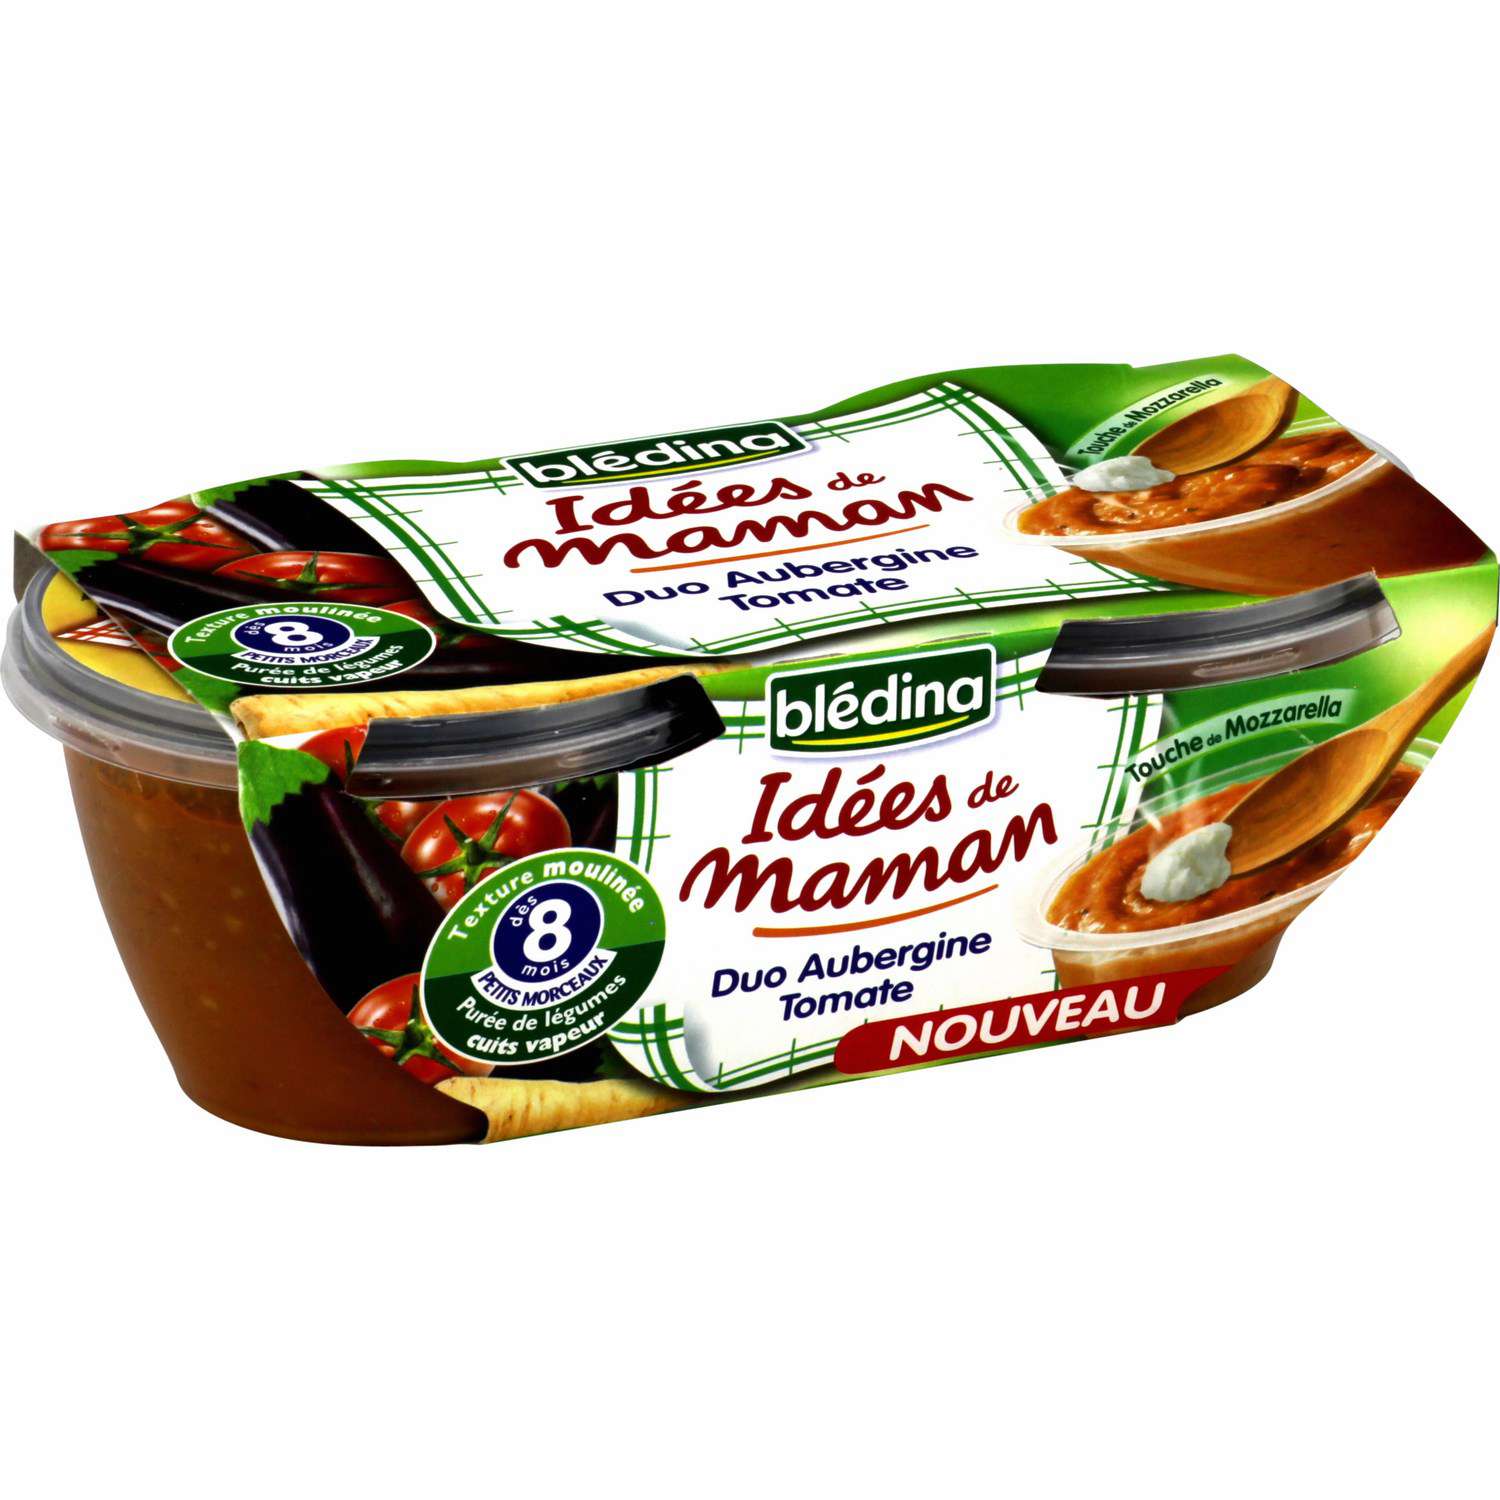 Bledina Idees de Maman Aubergines duo & Tomatoes 2x200g from 8 months